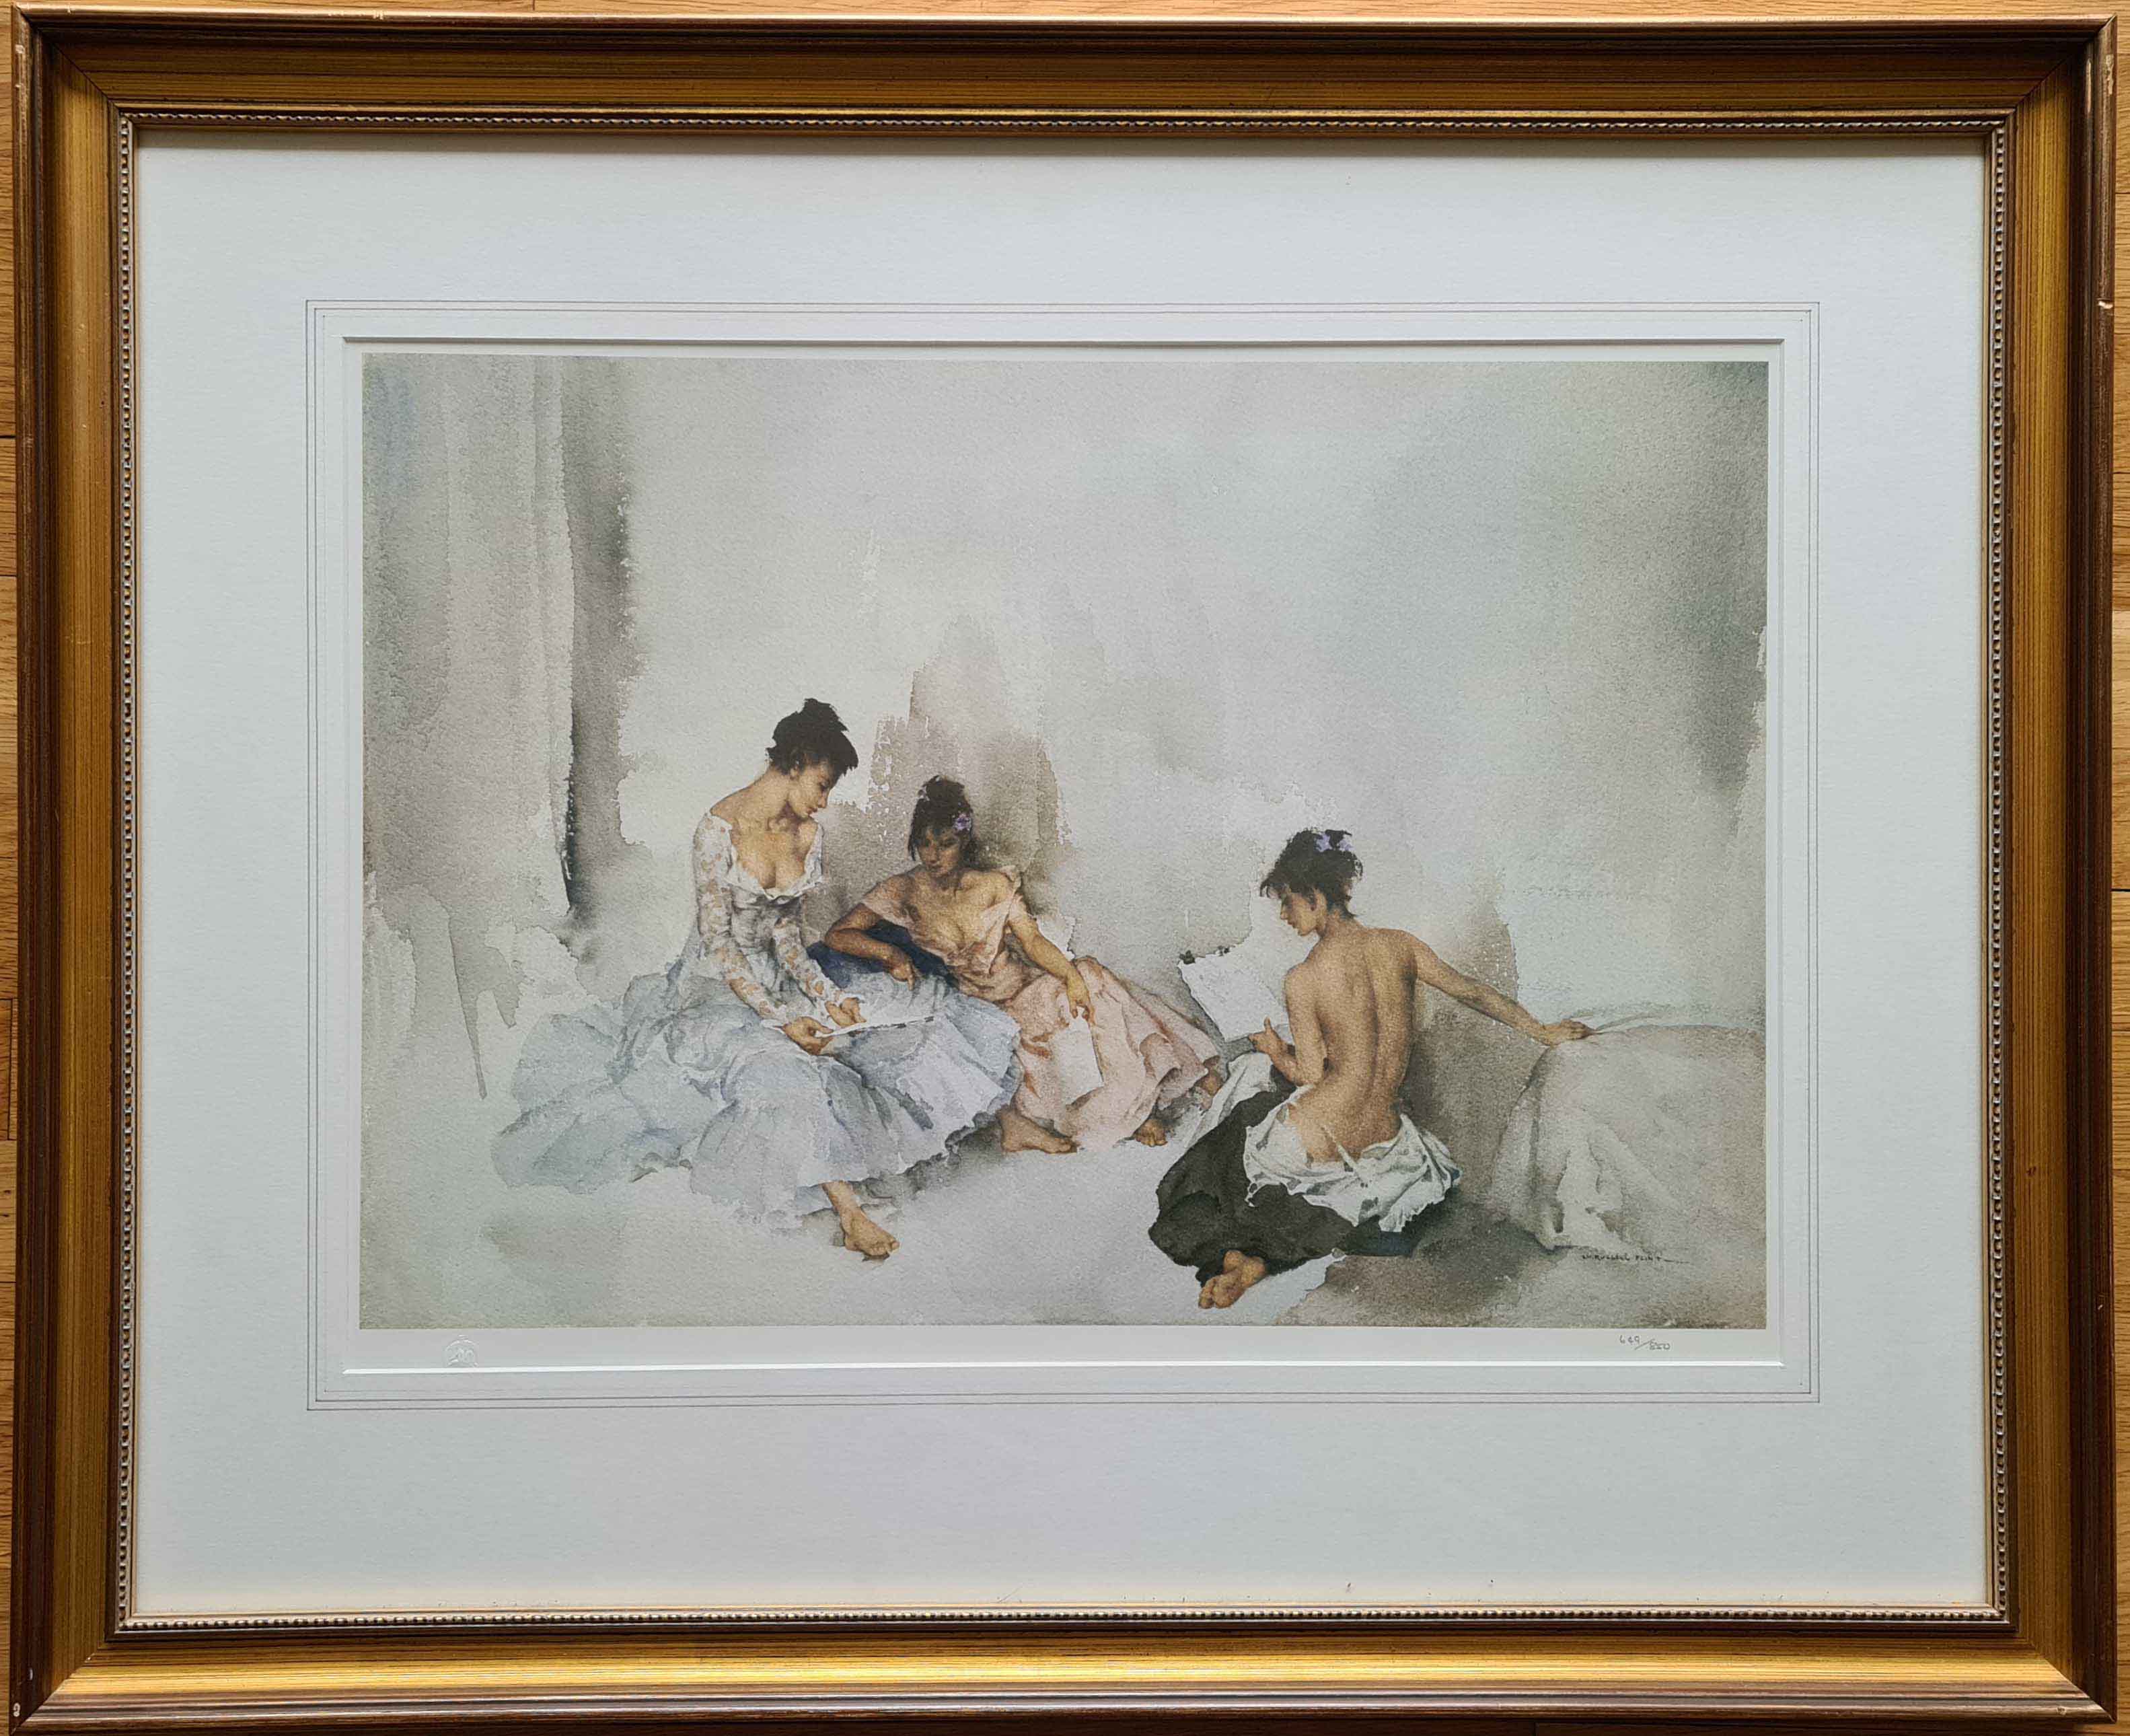 russell flint act II scene I, limited edition, print